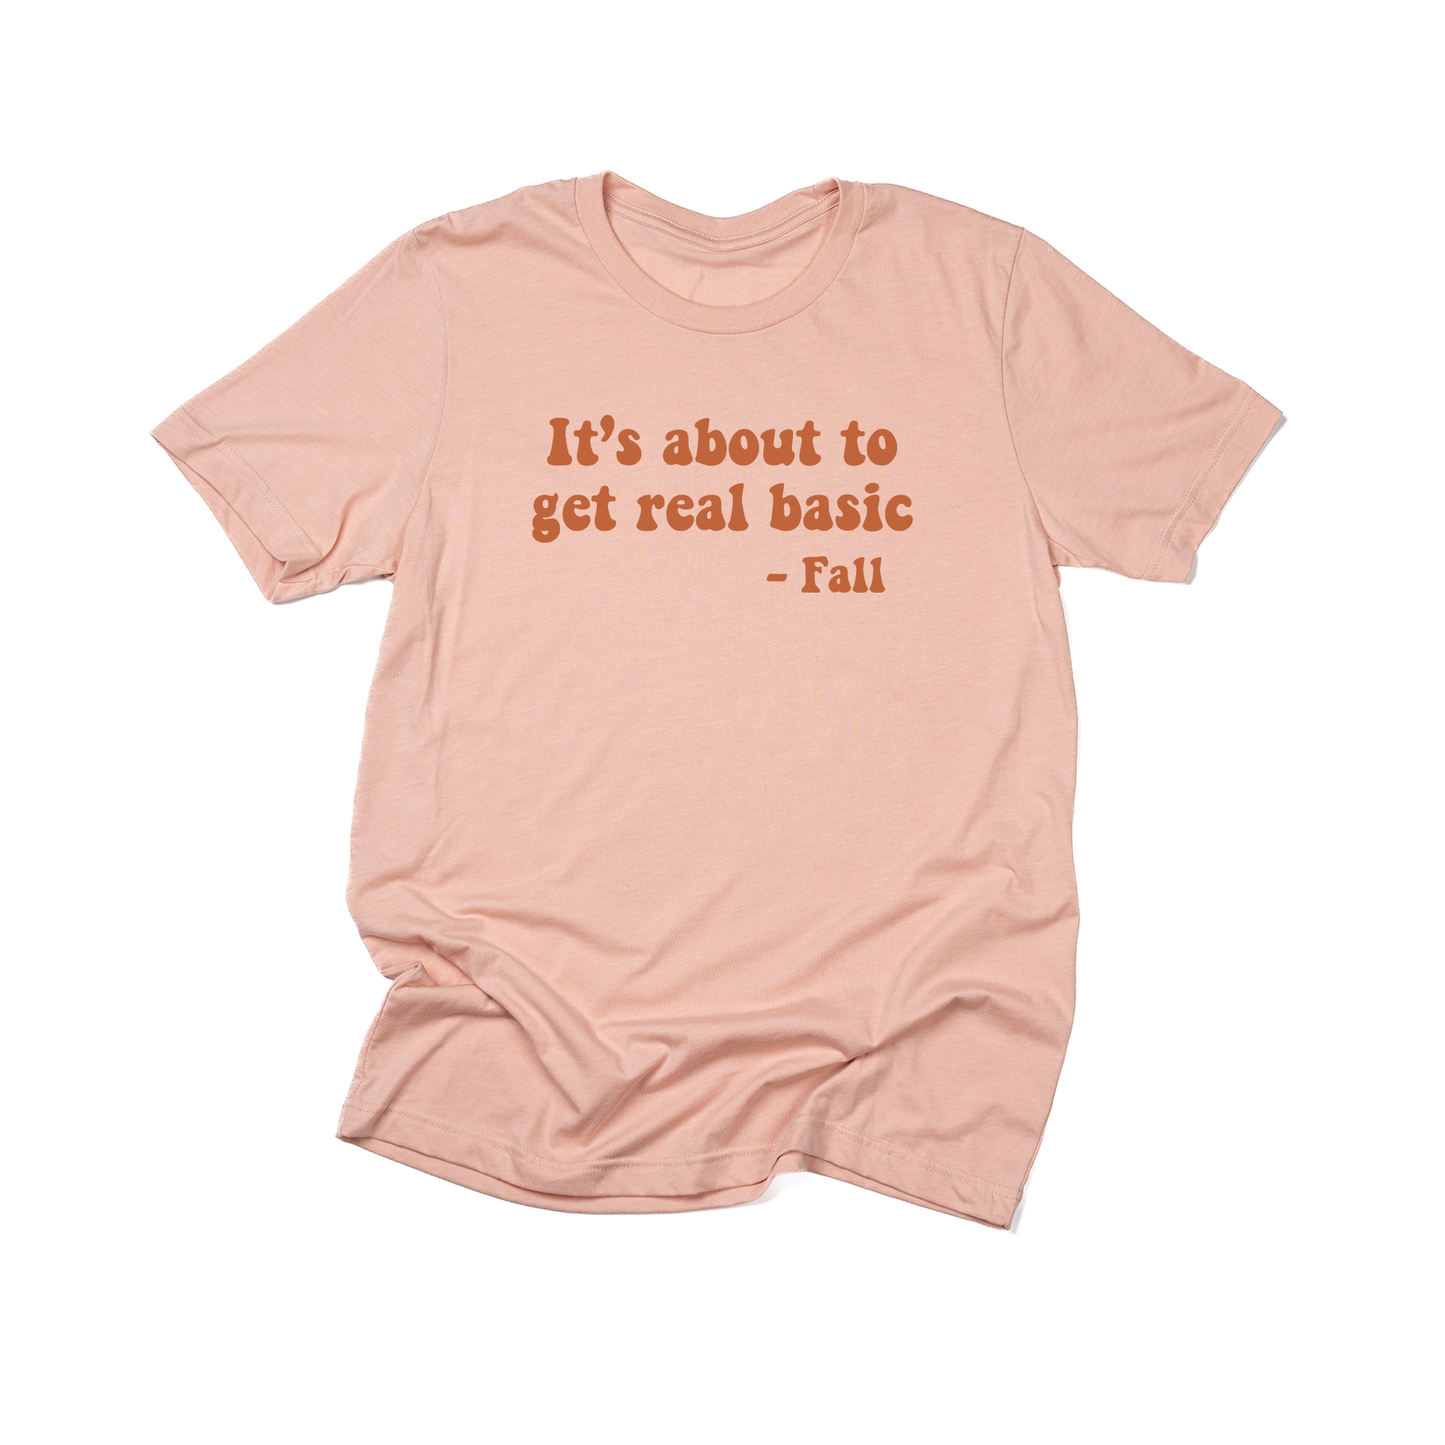 It's about to get real basic (Rust) - Tee (Peach)